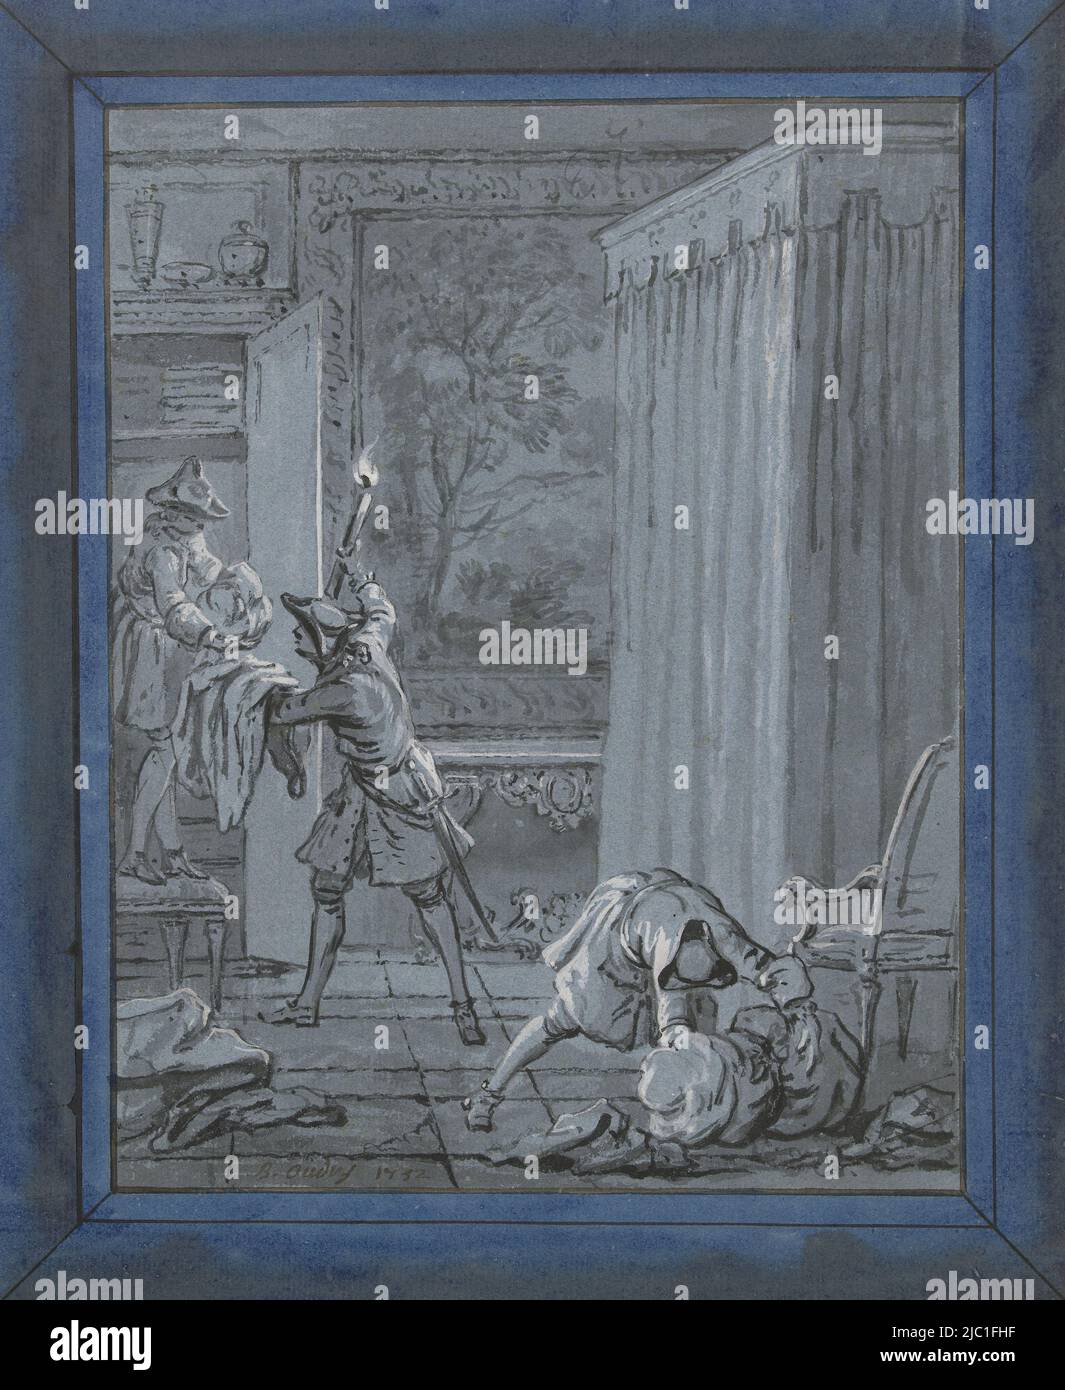 A burglary in a house. Design for a print, The husband, the wife and the thief / Le Mari, la Femme et le Voleur Illustrations for fables by Jean de La Fontaine (series title), draughtsman: Jean-Baptiste Oudry, 1732, paper, brush, h 311 mm × w 260 mm, h 242 mm × w 190 mm Stock Photo